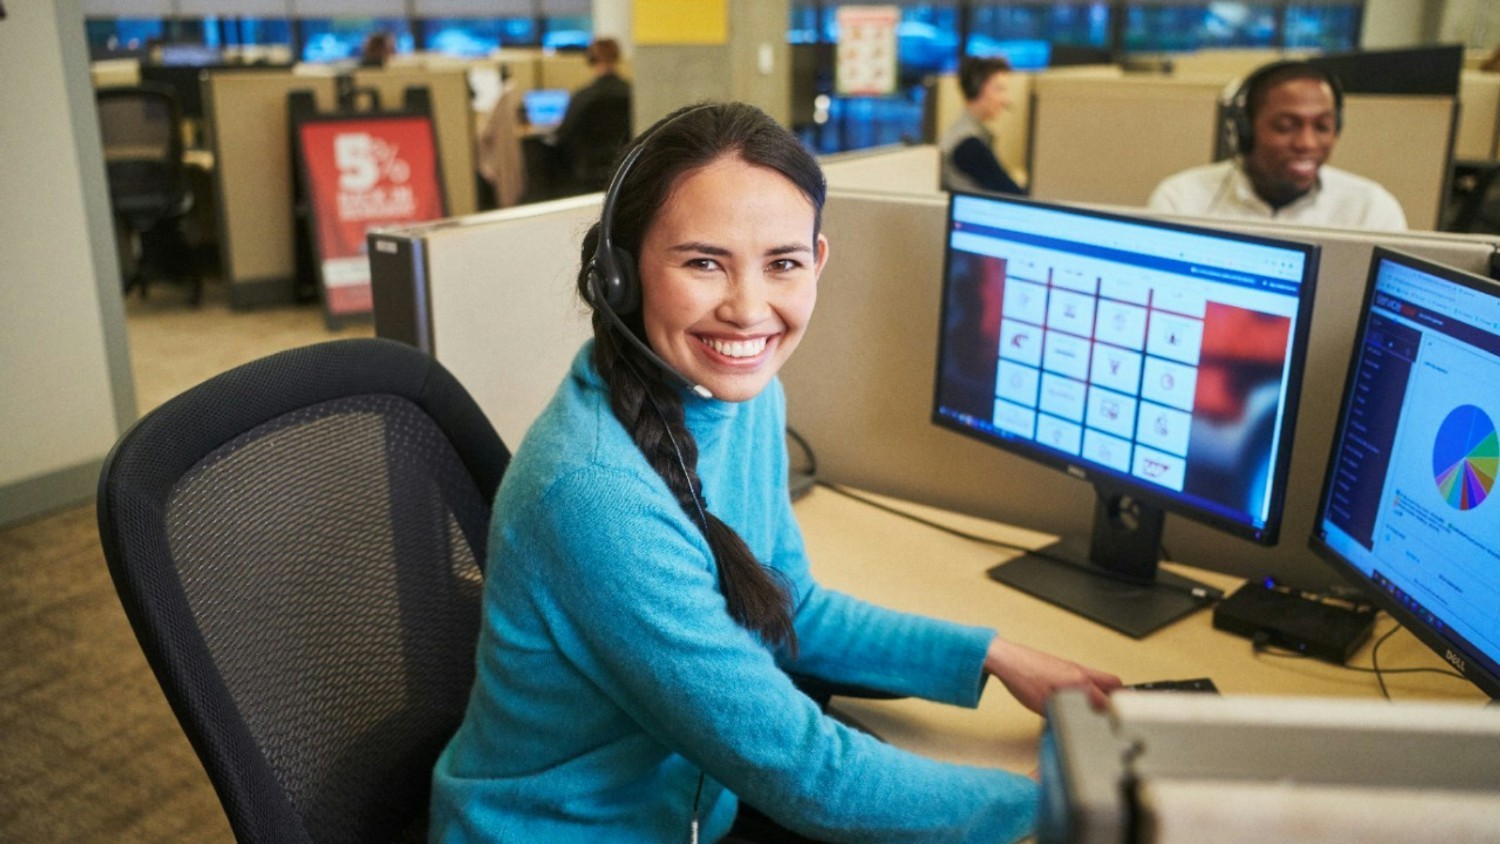 In our Tractor Supply Customer Solutions Center, we are ready to meet customer needs through legendary customer service.